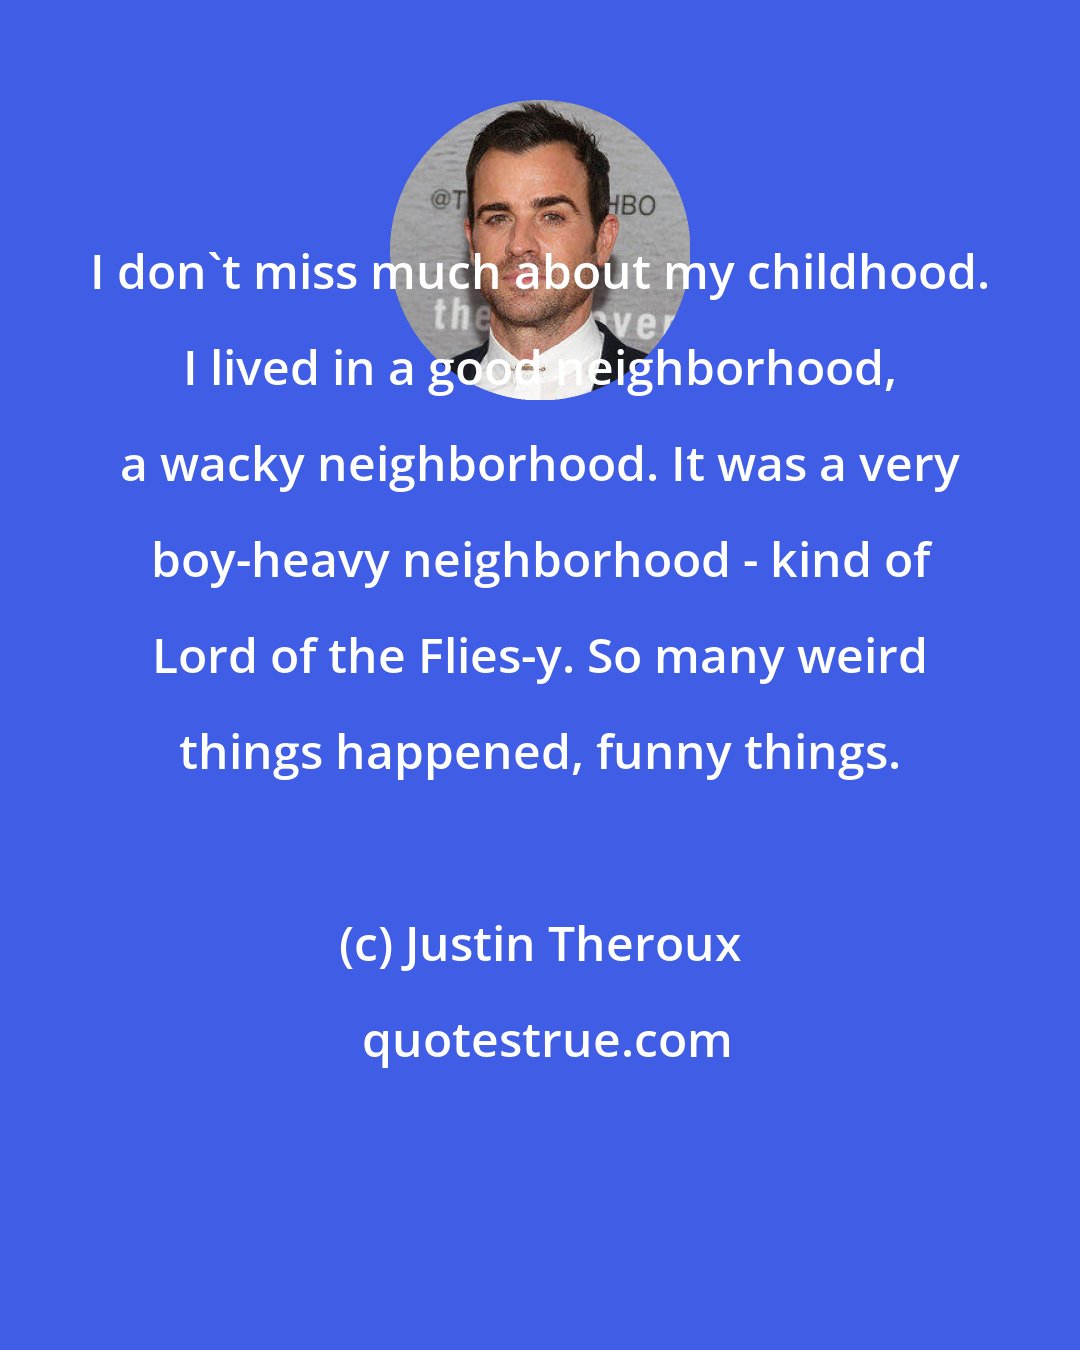 Justin Theroux: I don't miss much about my childhood. I lived in a good neighborhood, a wacky neighborhood. It was a very boy-heavy neighborhood - kind of Lord of the Flies-y. So many weird things happened, funny things.